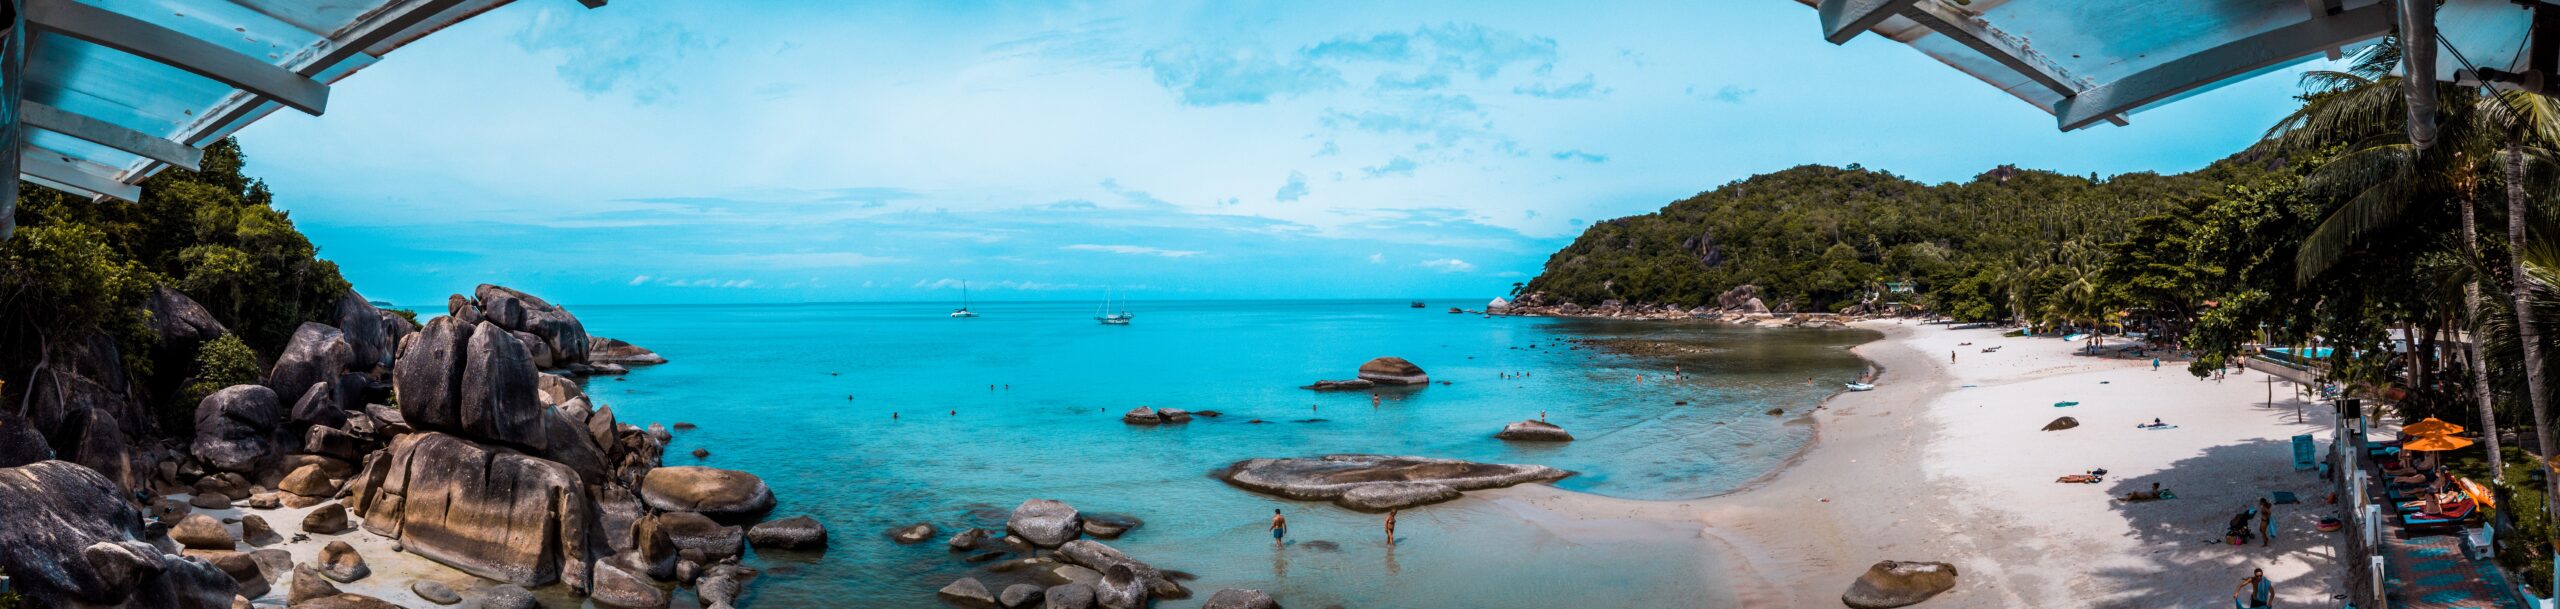 Best Ferry Options from Koh Samui to Koh Tao